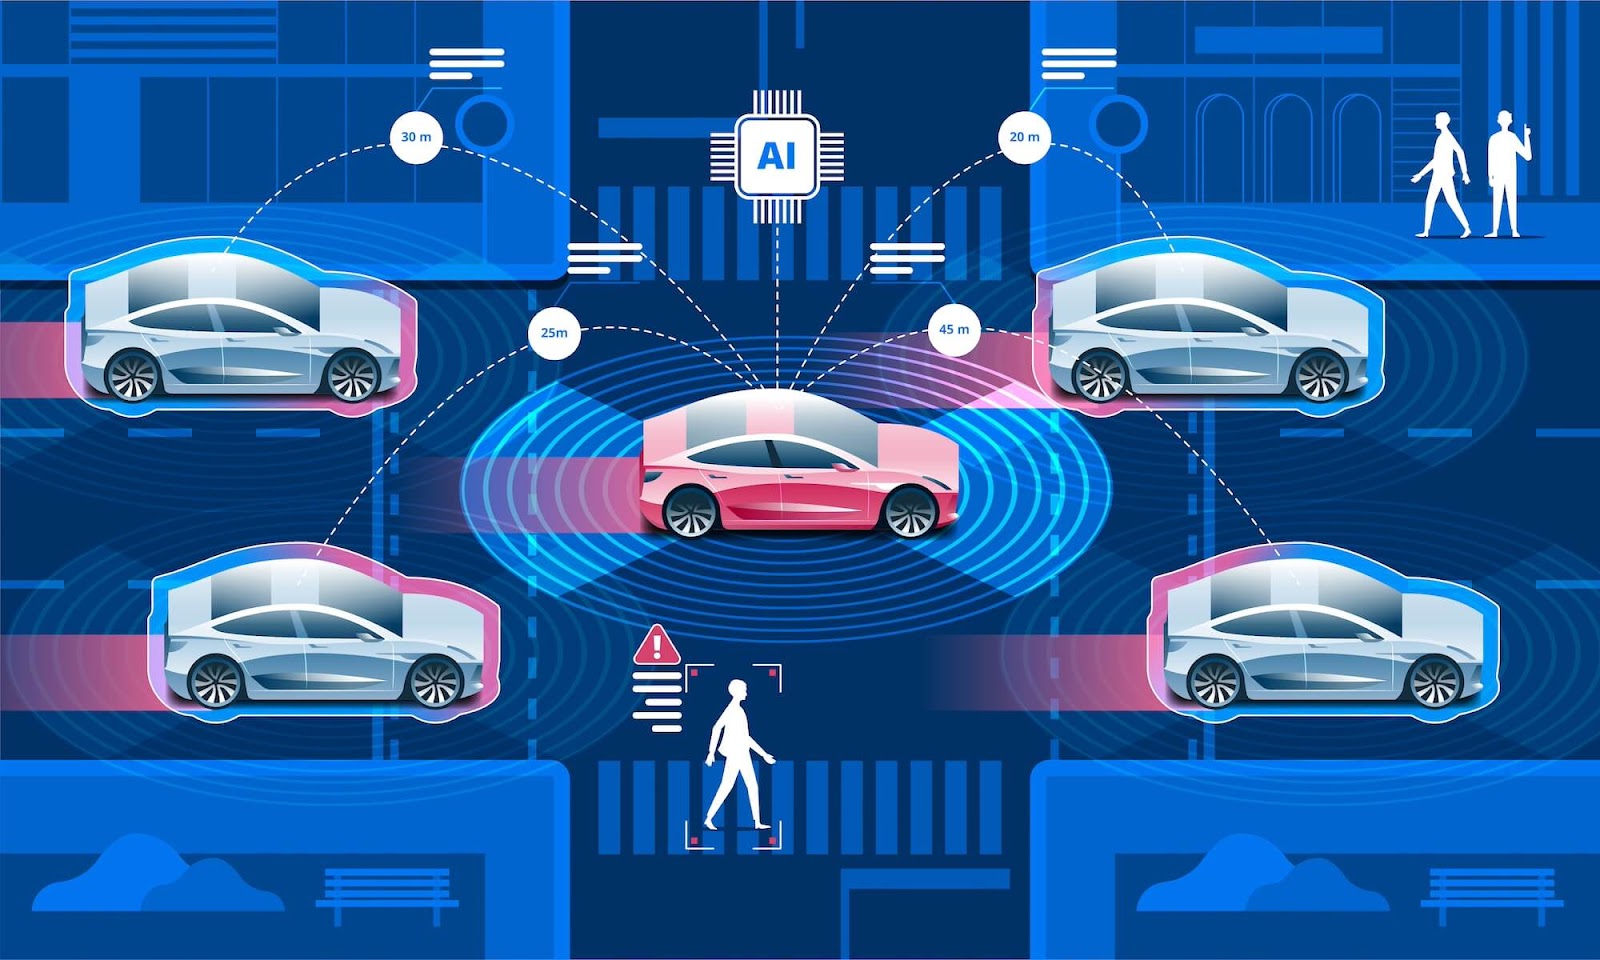 Digital illustration of autonomous cars on a smart city street, interconnected through AI, with distance measurements and communication lines showing real-time data exchange for pedestrian safety and traffic management.